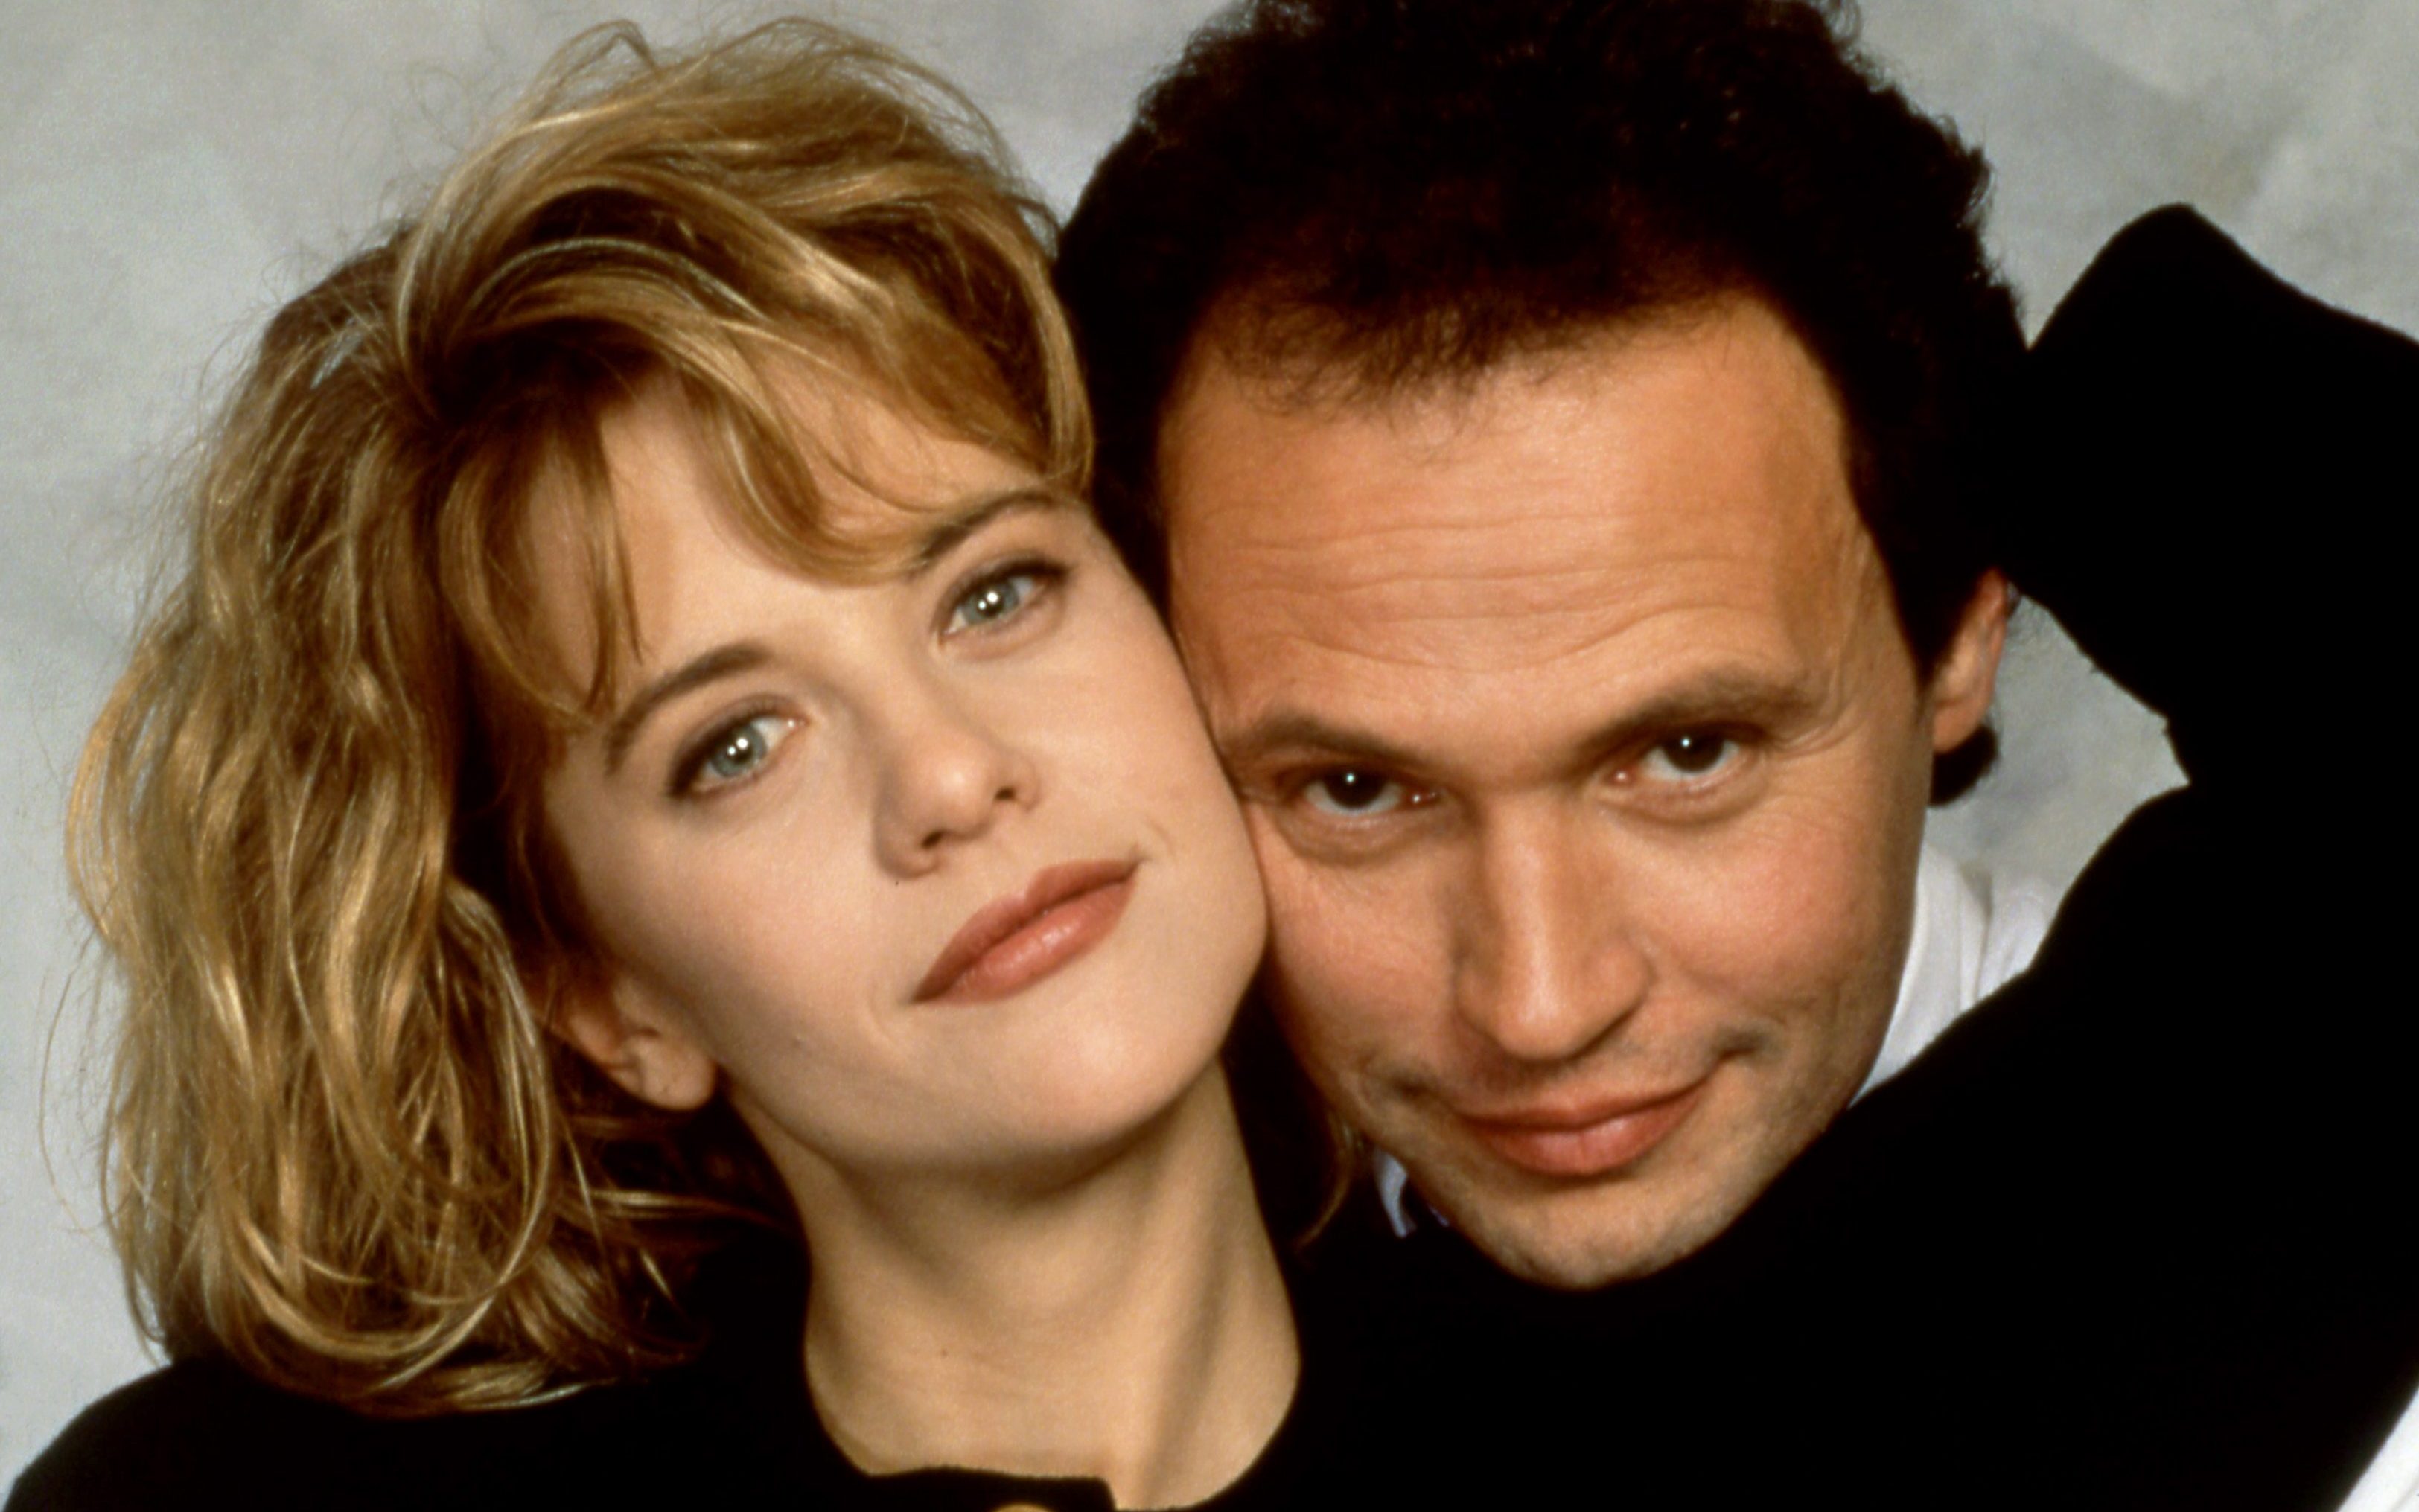 Meg Ryan and Billy Crystal portrait for When Harry Met Sally, 1989